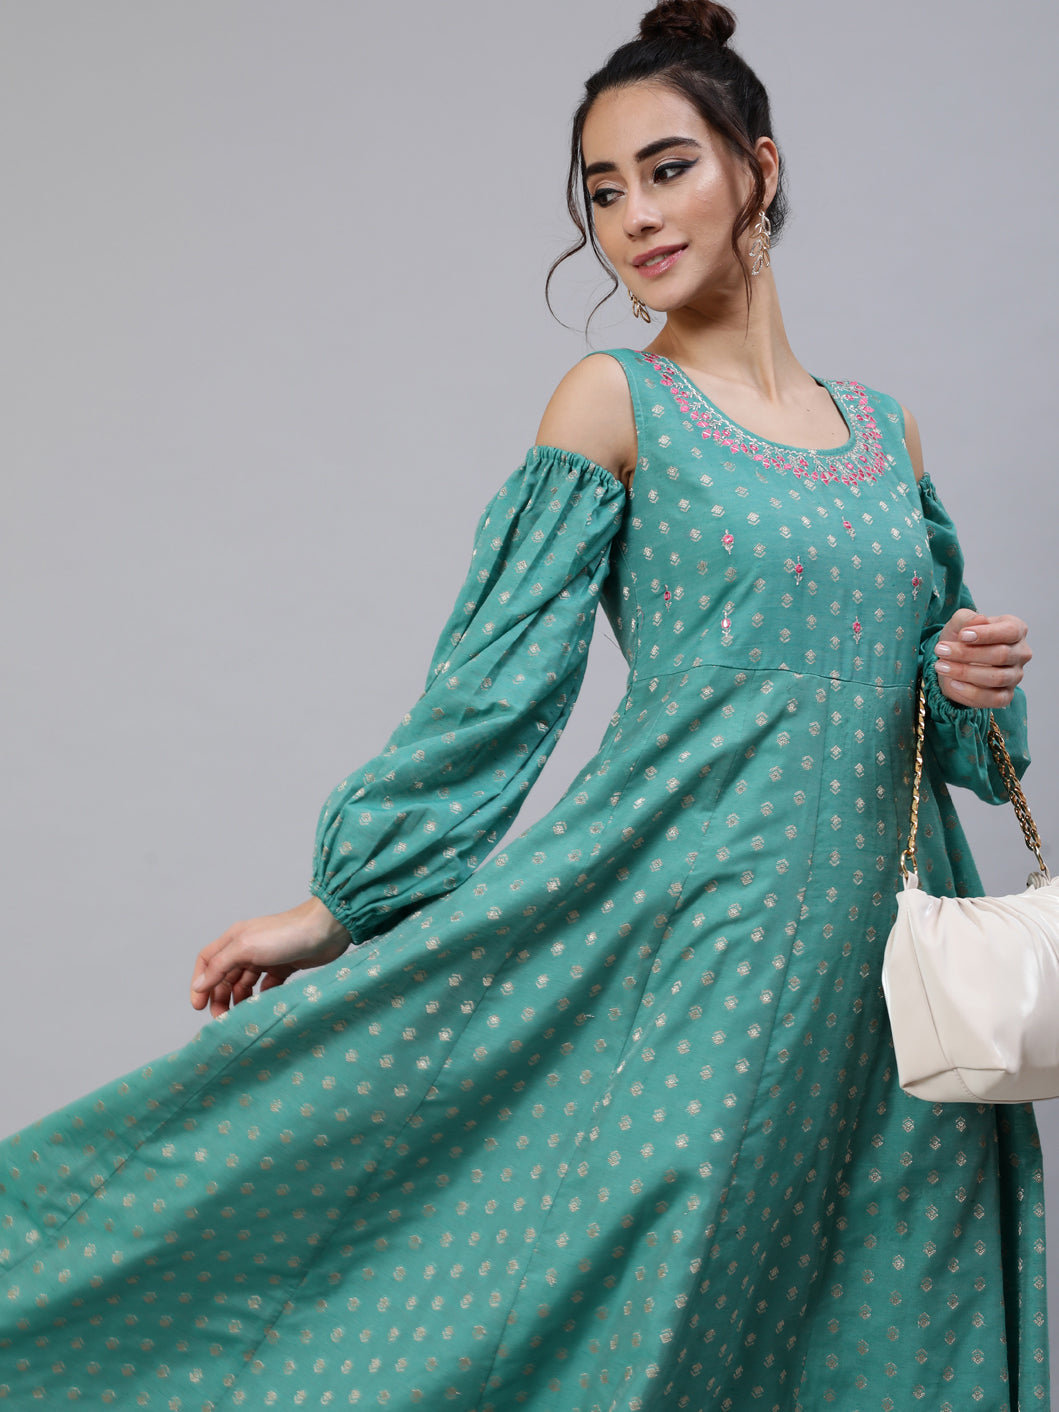 Green Embroidered Flared Maxi Dress